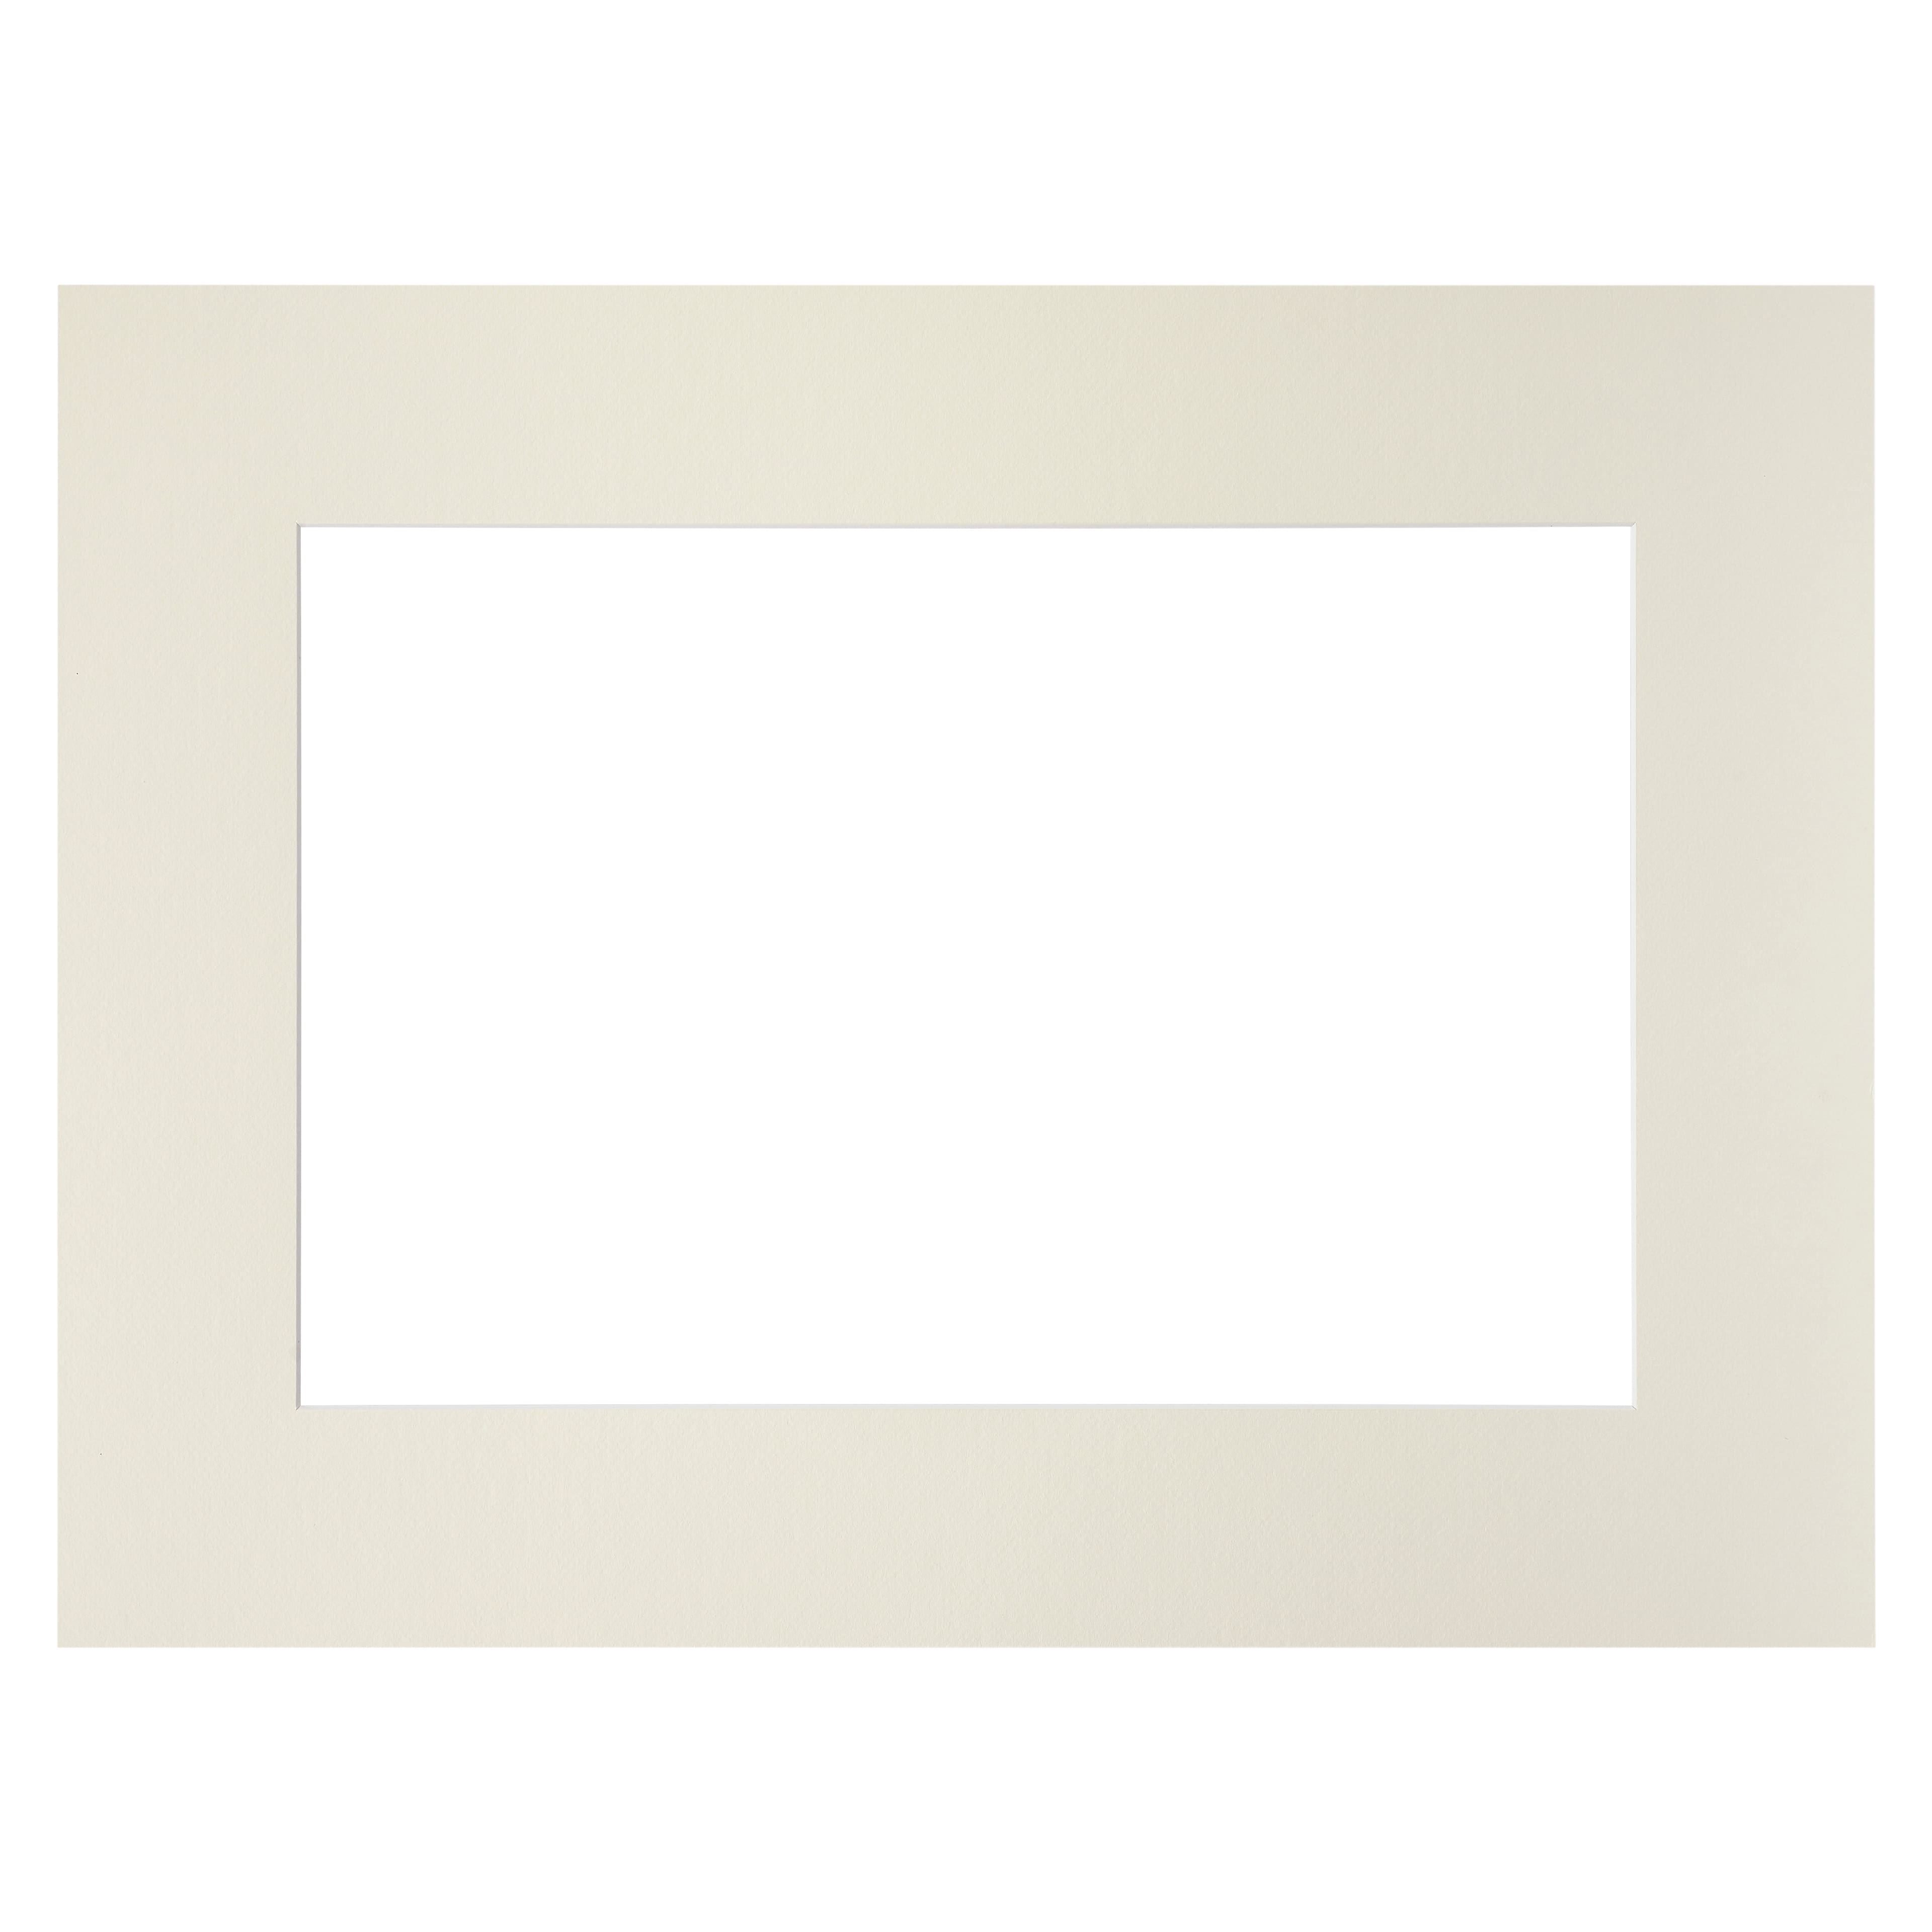 Mat Board Value Bundles WC Smooth White 18x24 Fits 12x18 Photo